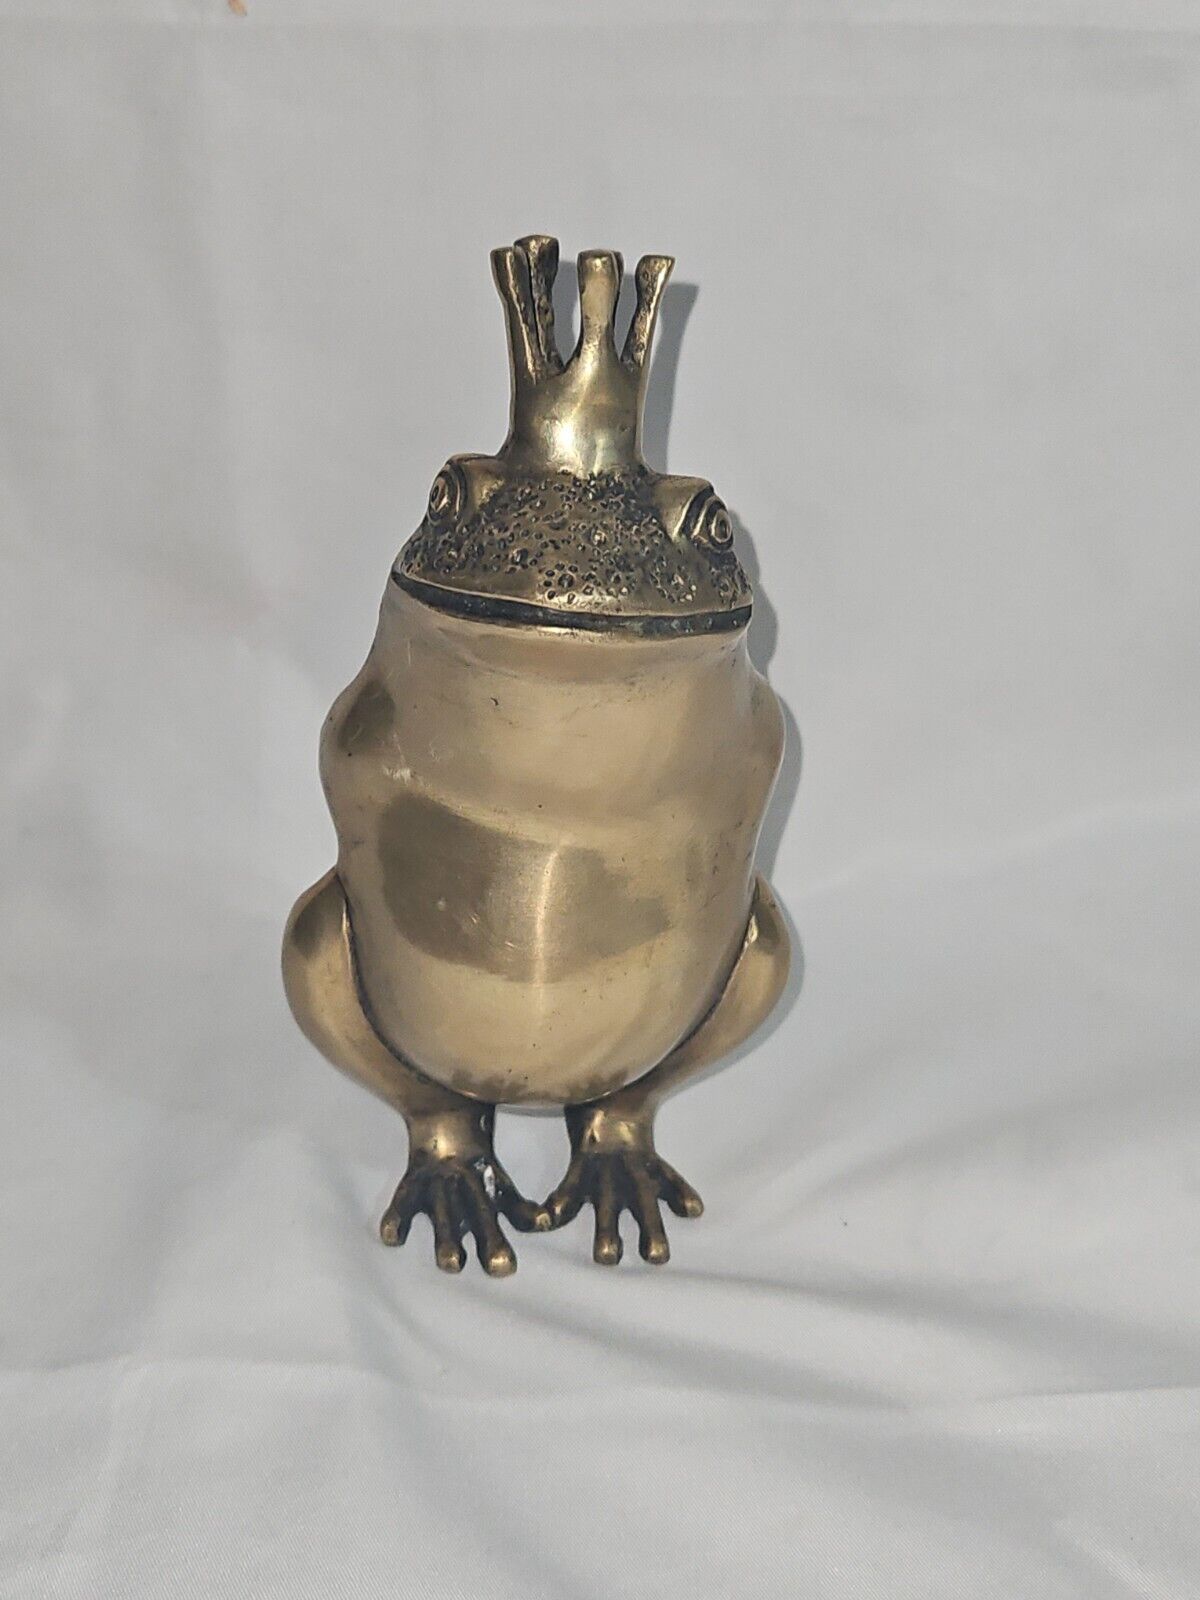 Vintage Charming  Brass Frog  Prince With Crown  Paperweight Decor 6x3